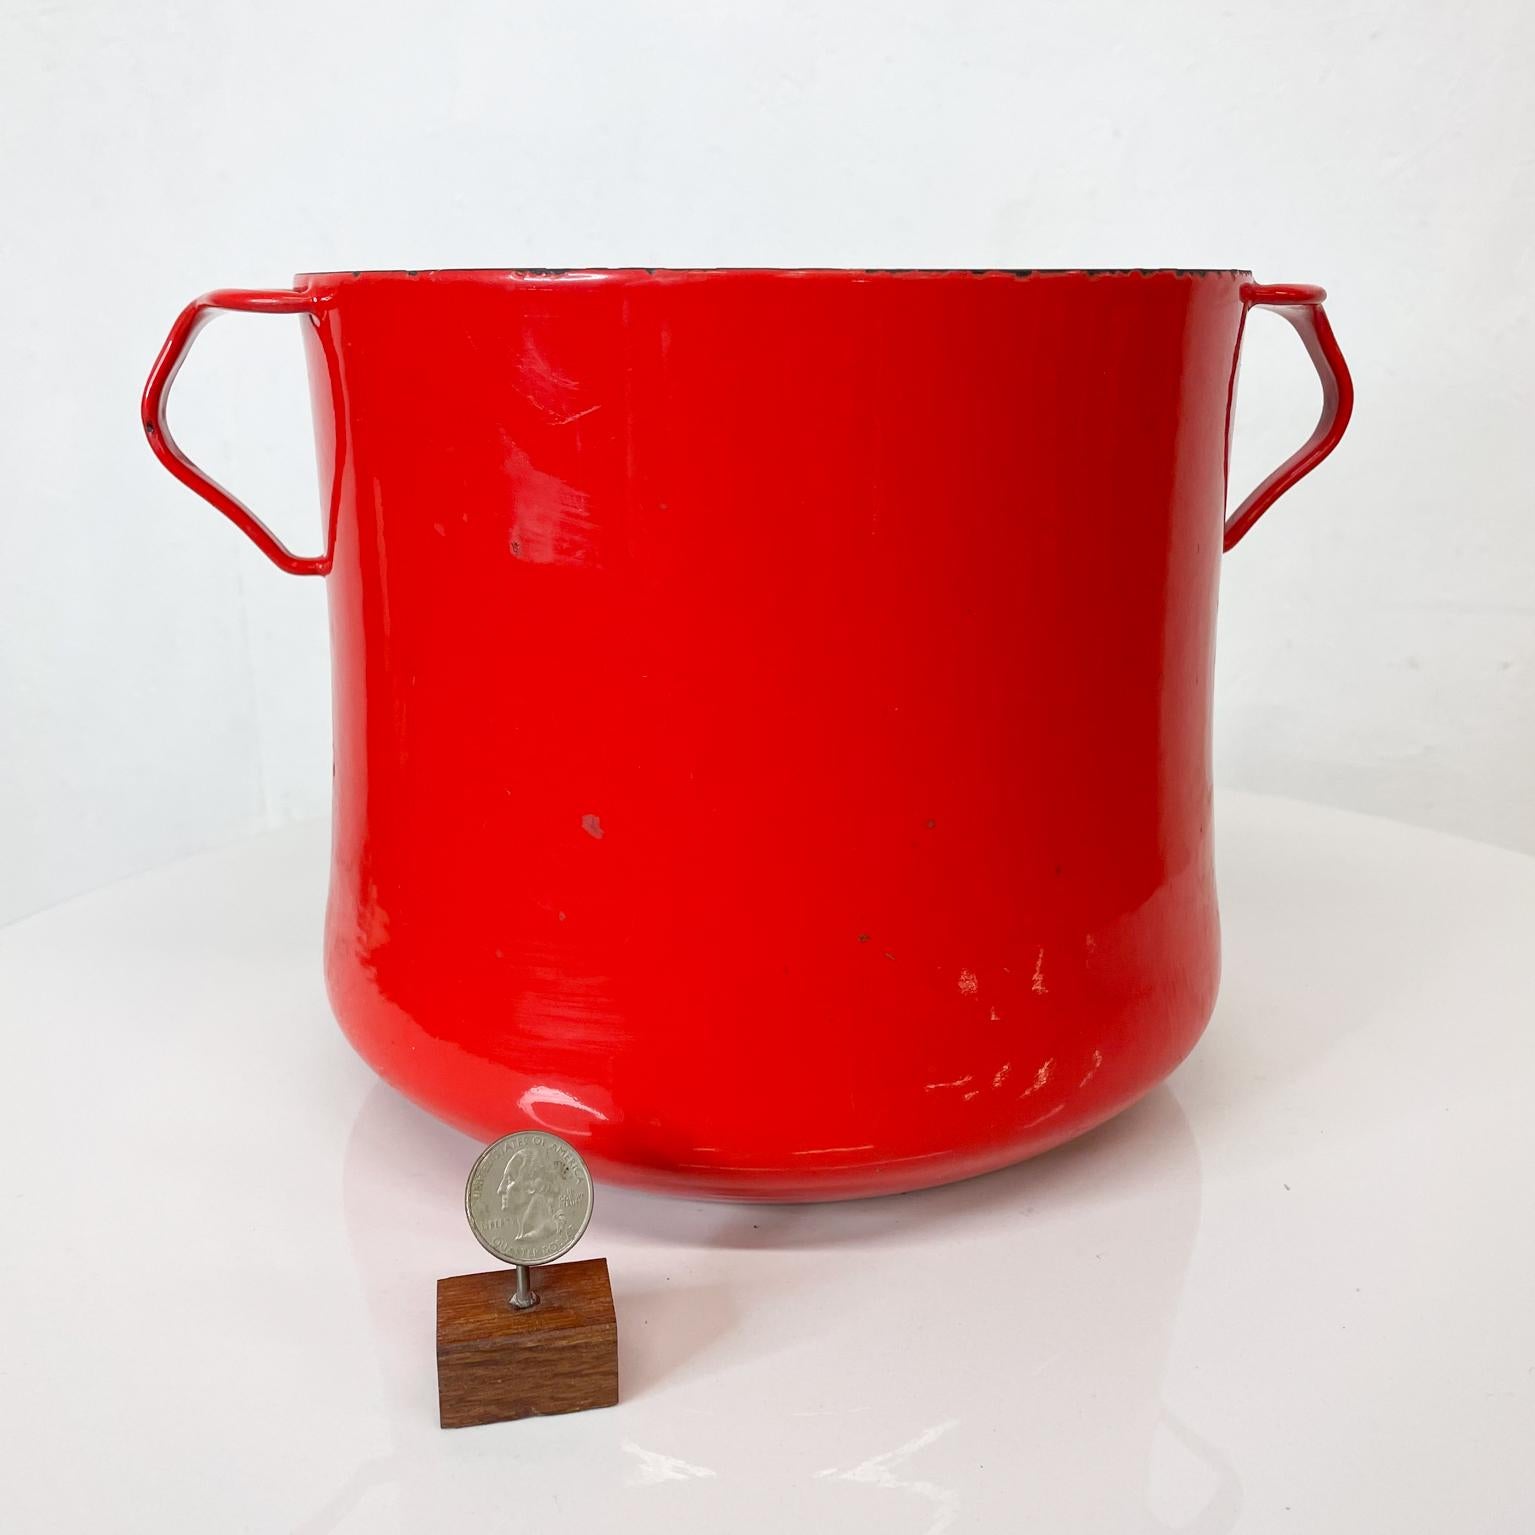 Dansk International designs red enamel Dutch oven casserole pot IHQ France
Listing is for pot only
Maker stamp present
Measures 7.88 height x 8.63 diameter x 11.63 width inches
Original preowned condition. Vintage presentation. No Lid is